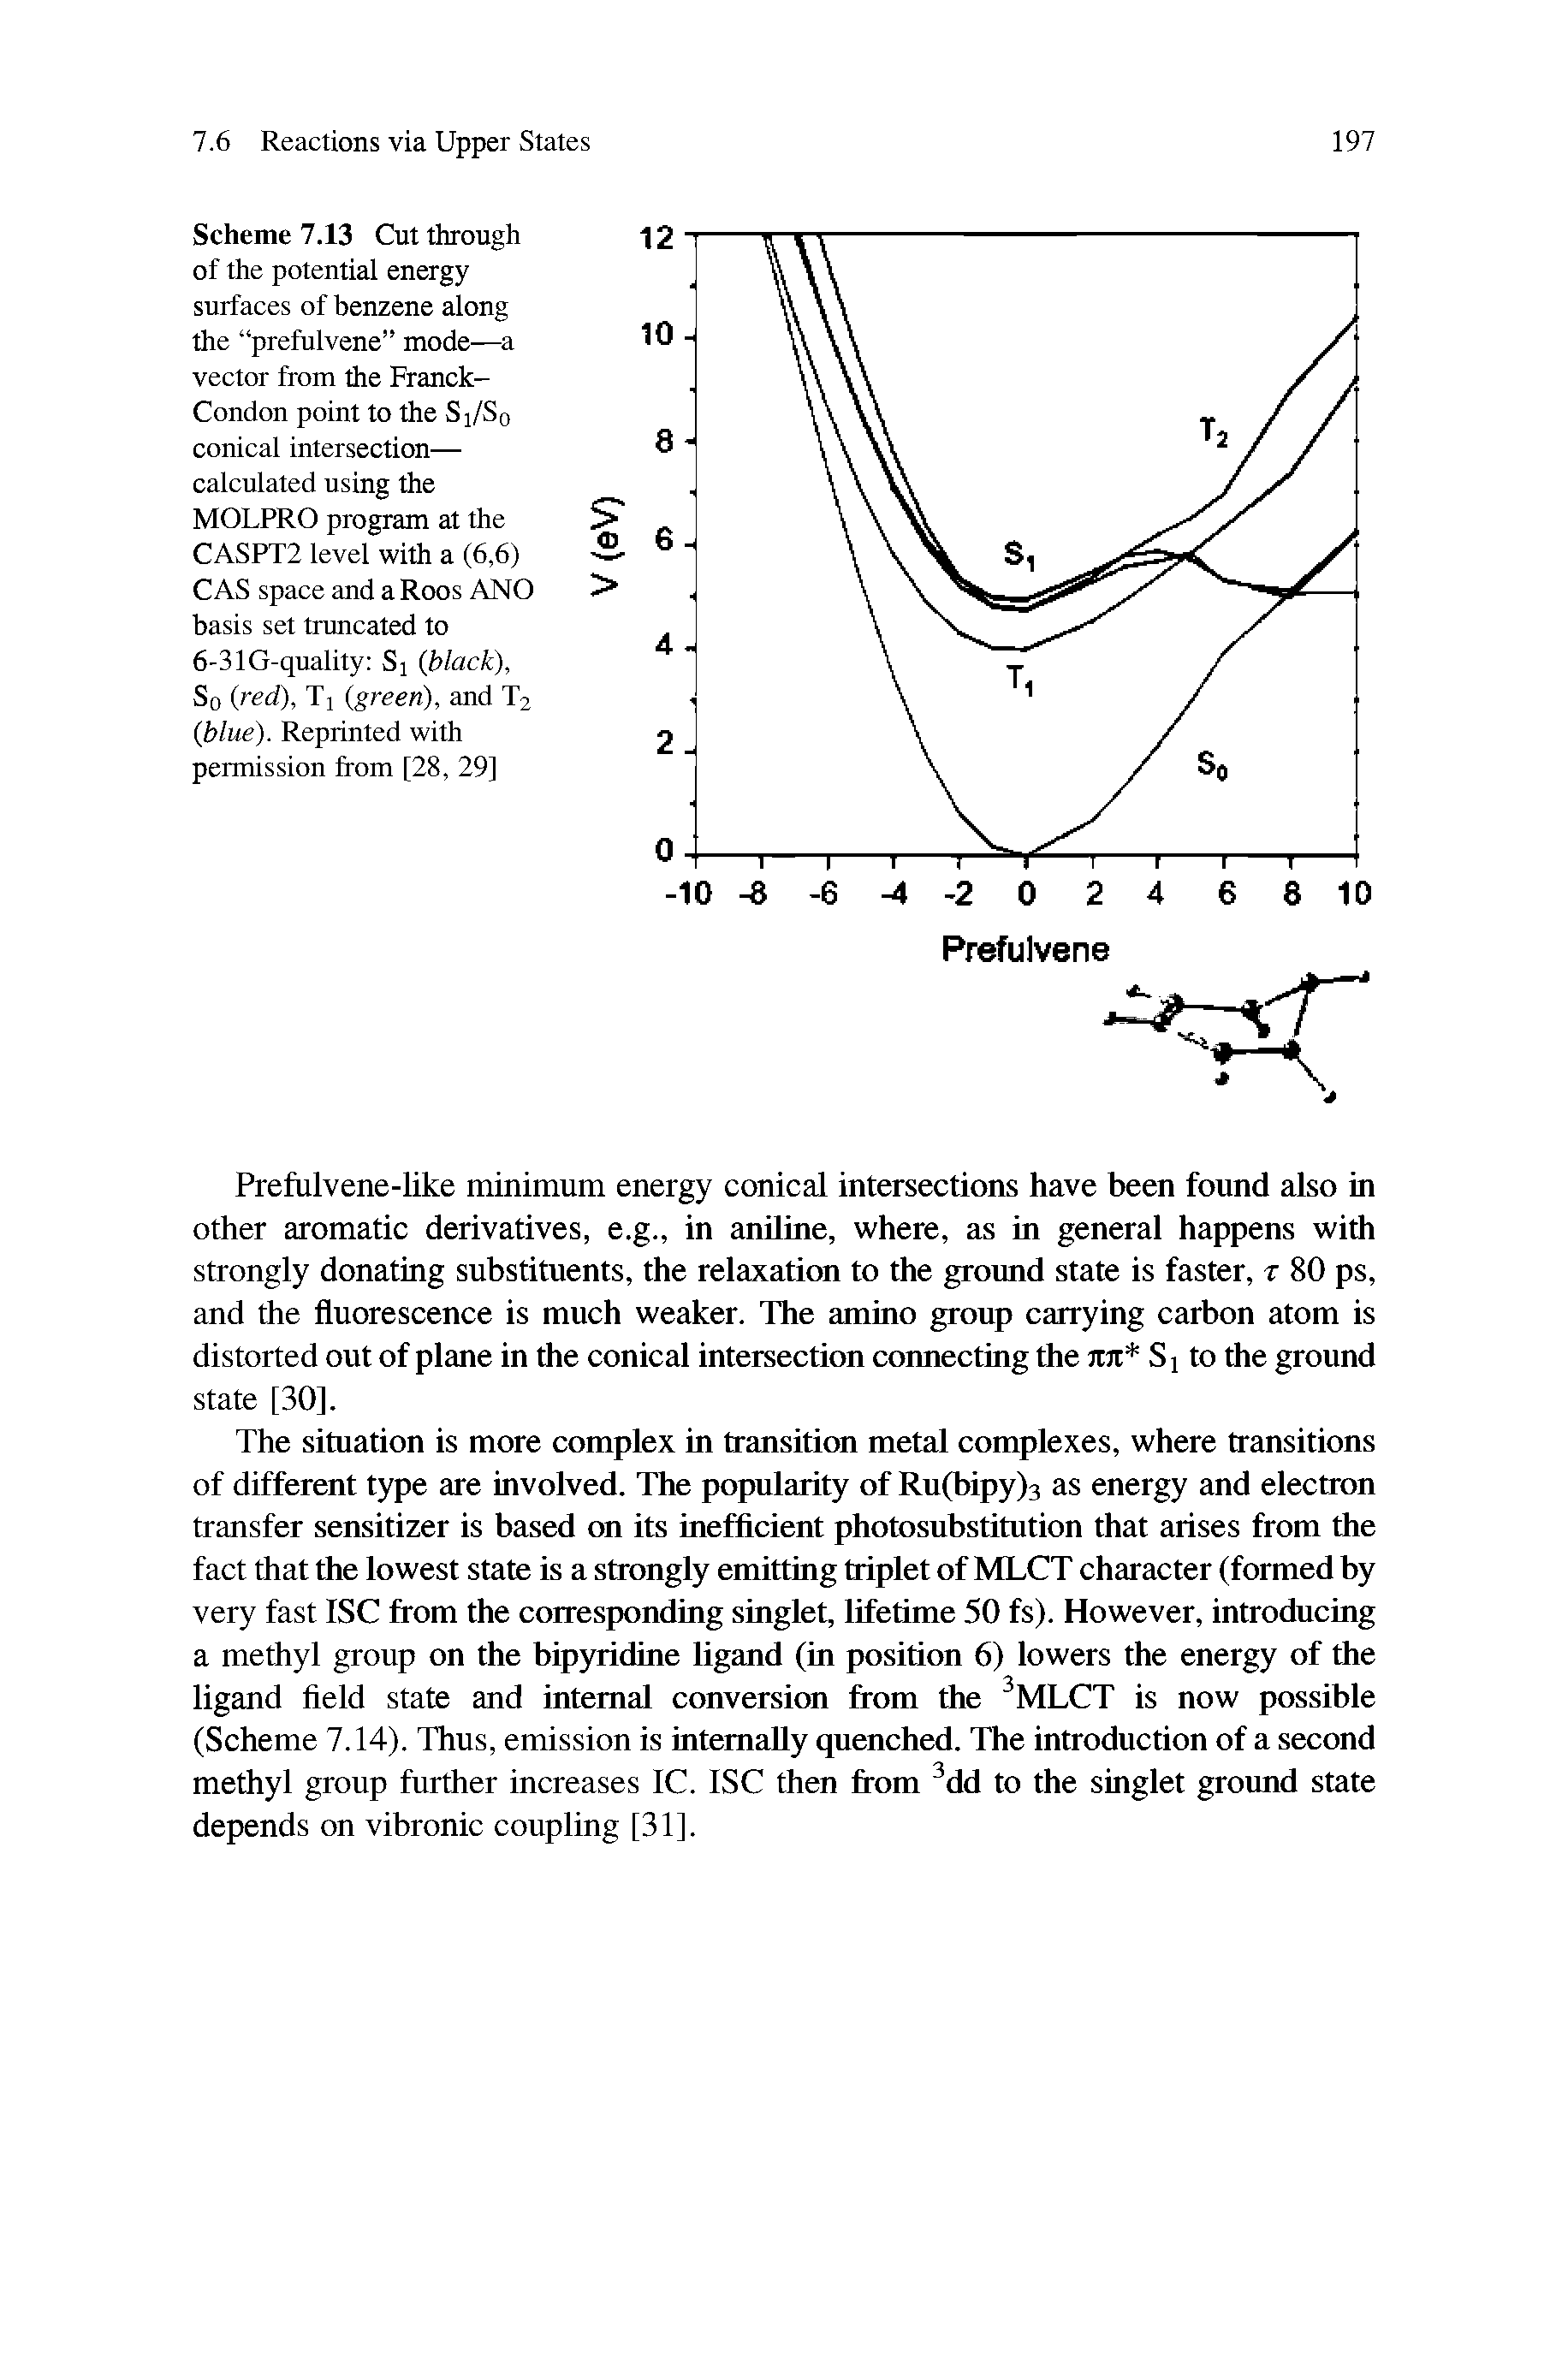 Scheme 7.13 Cut through of the potential energy surfaces of benzene along the prefulvene mode—a vector from the Franck-Condon point to the Sj/Sq conical intersection— calculated using the MOLPRO program at the CASPT2 level with a (6,6) CAS space and a Roos ANO basis set truncated to 6-31G-quality Sj (black). So (red), Tj (green), and T2 (blue). Reprinted with permission from [28, 29]...